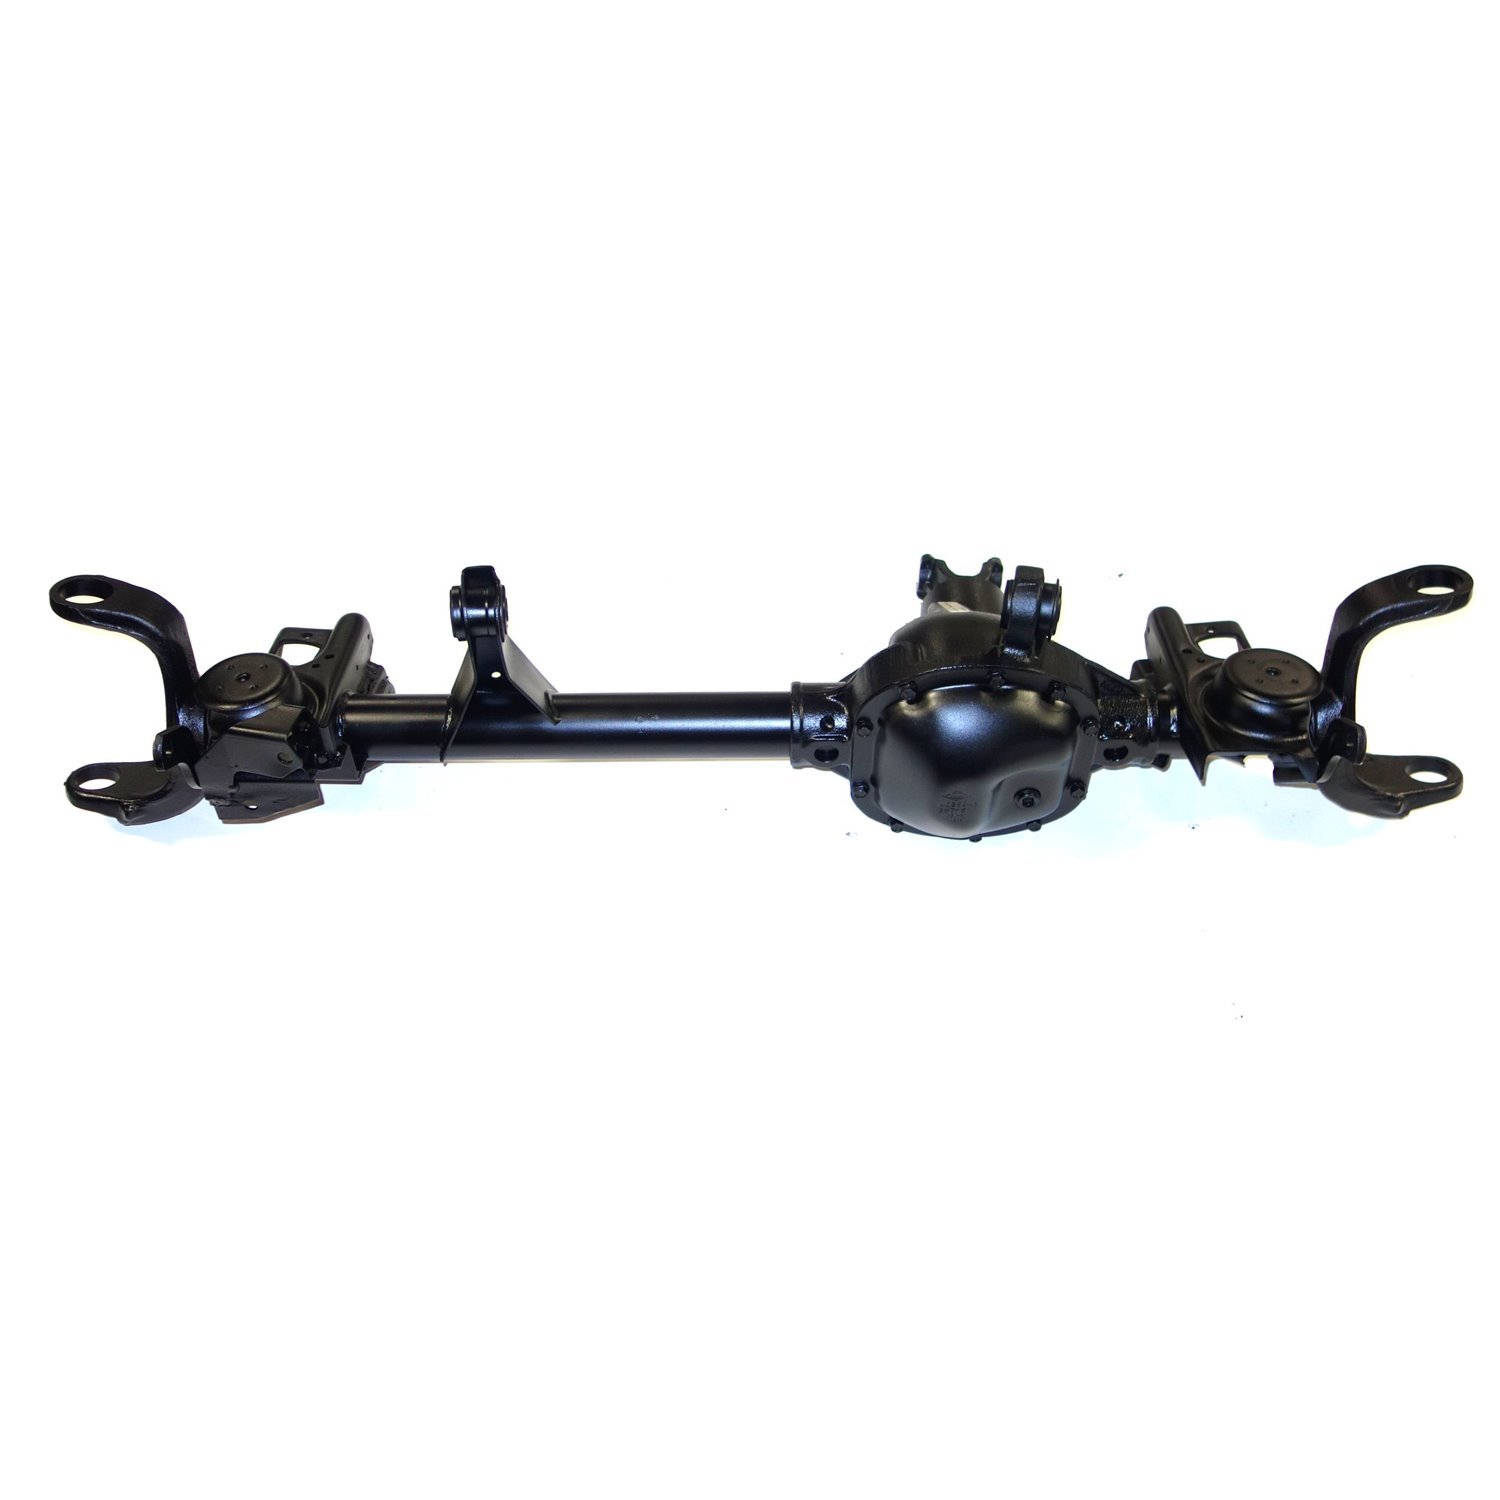 Remanufactured Complete Axle Assembly for Dana 30 90-95 Jeep Wrangler 3.55 Ratio w/o ABS